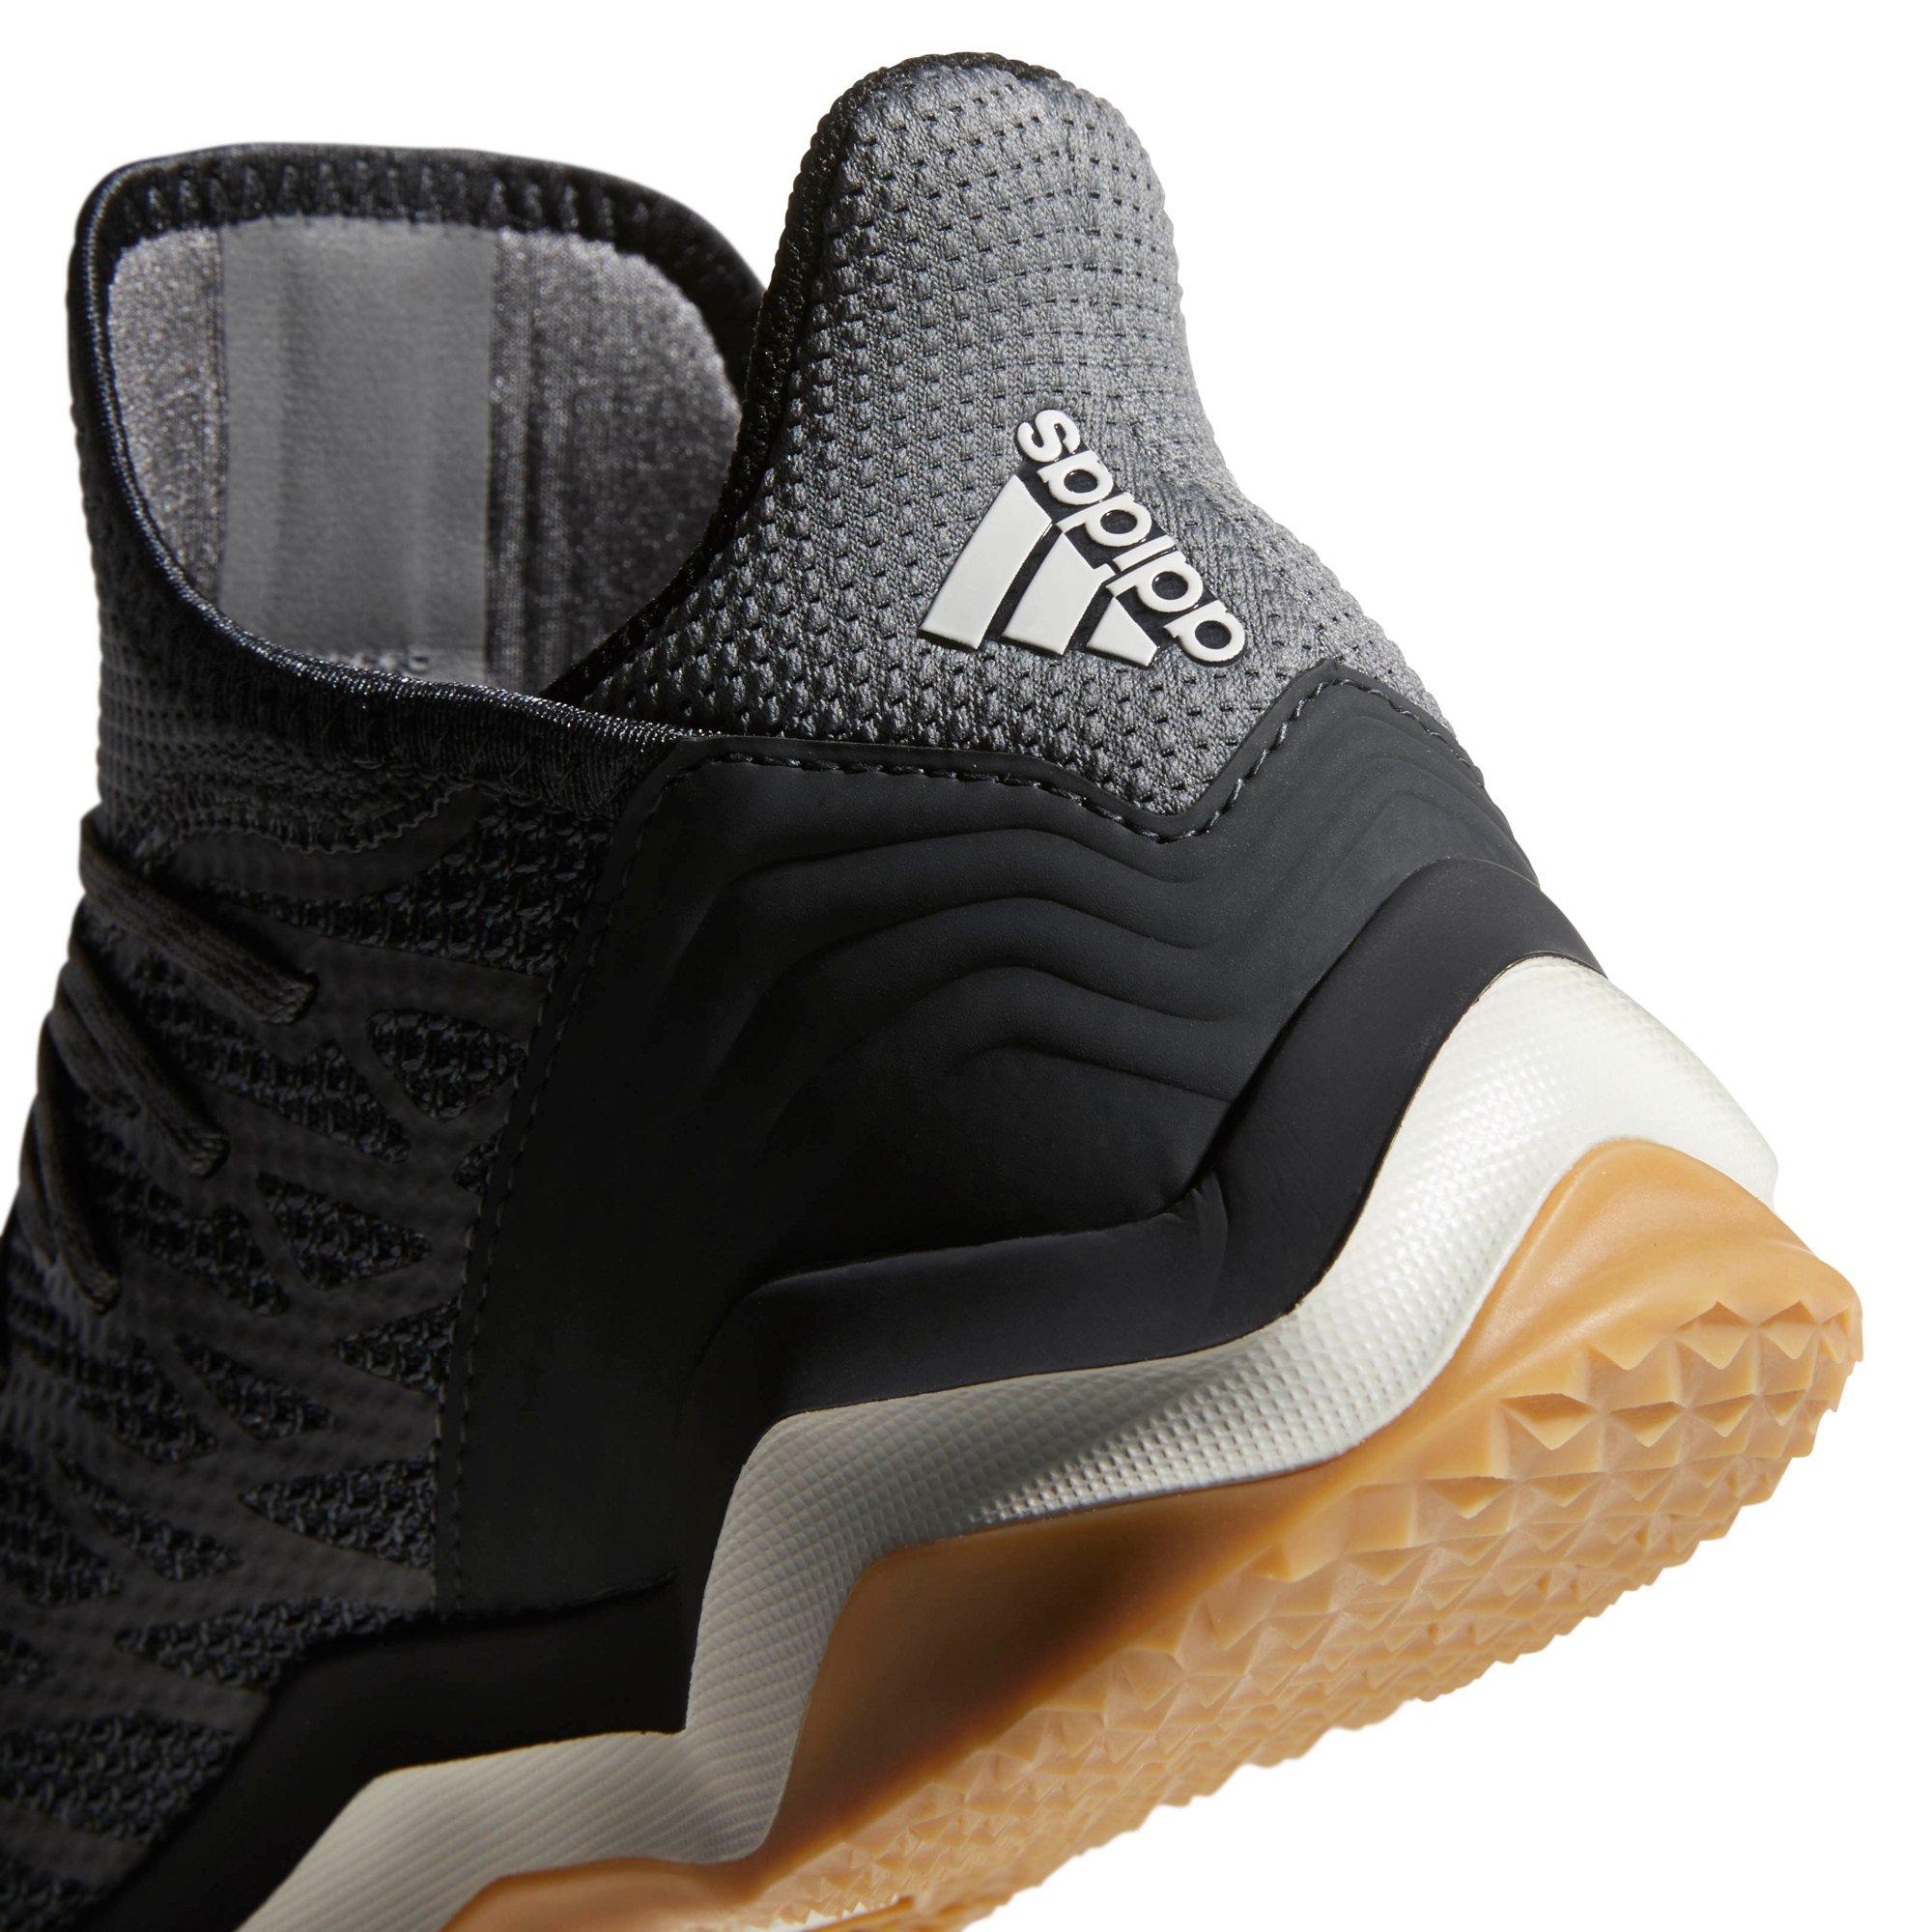 icon 4 trainer shoes